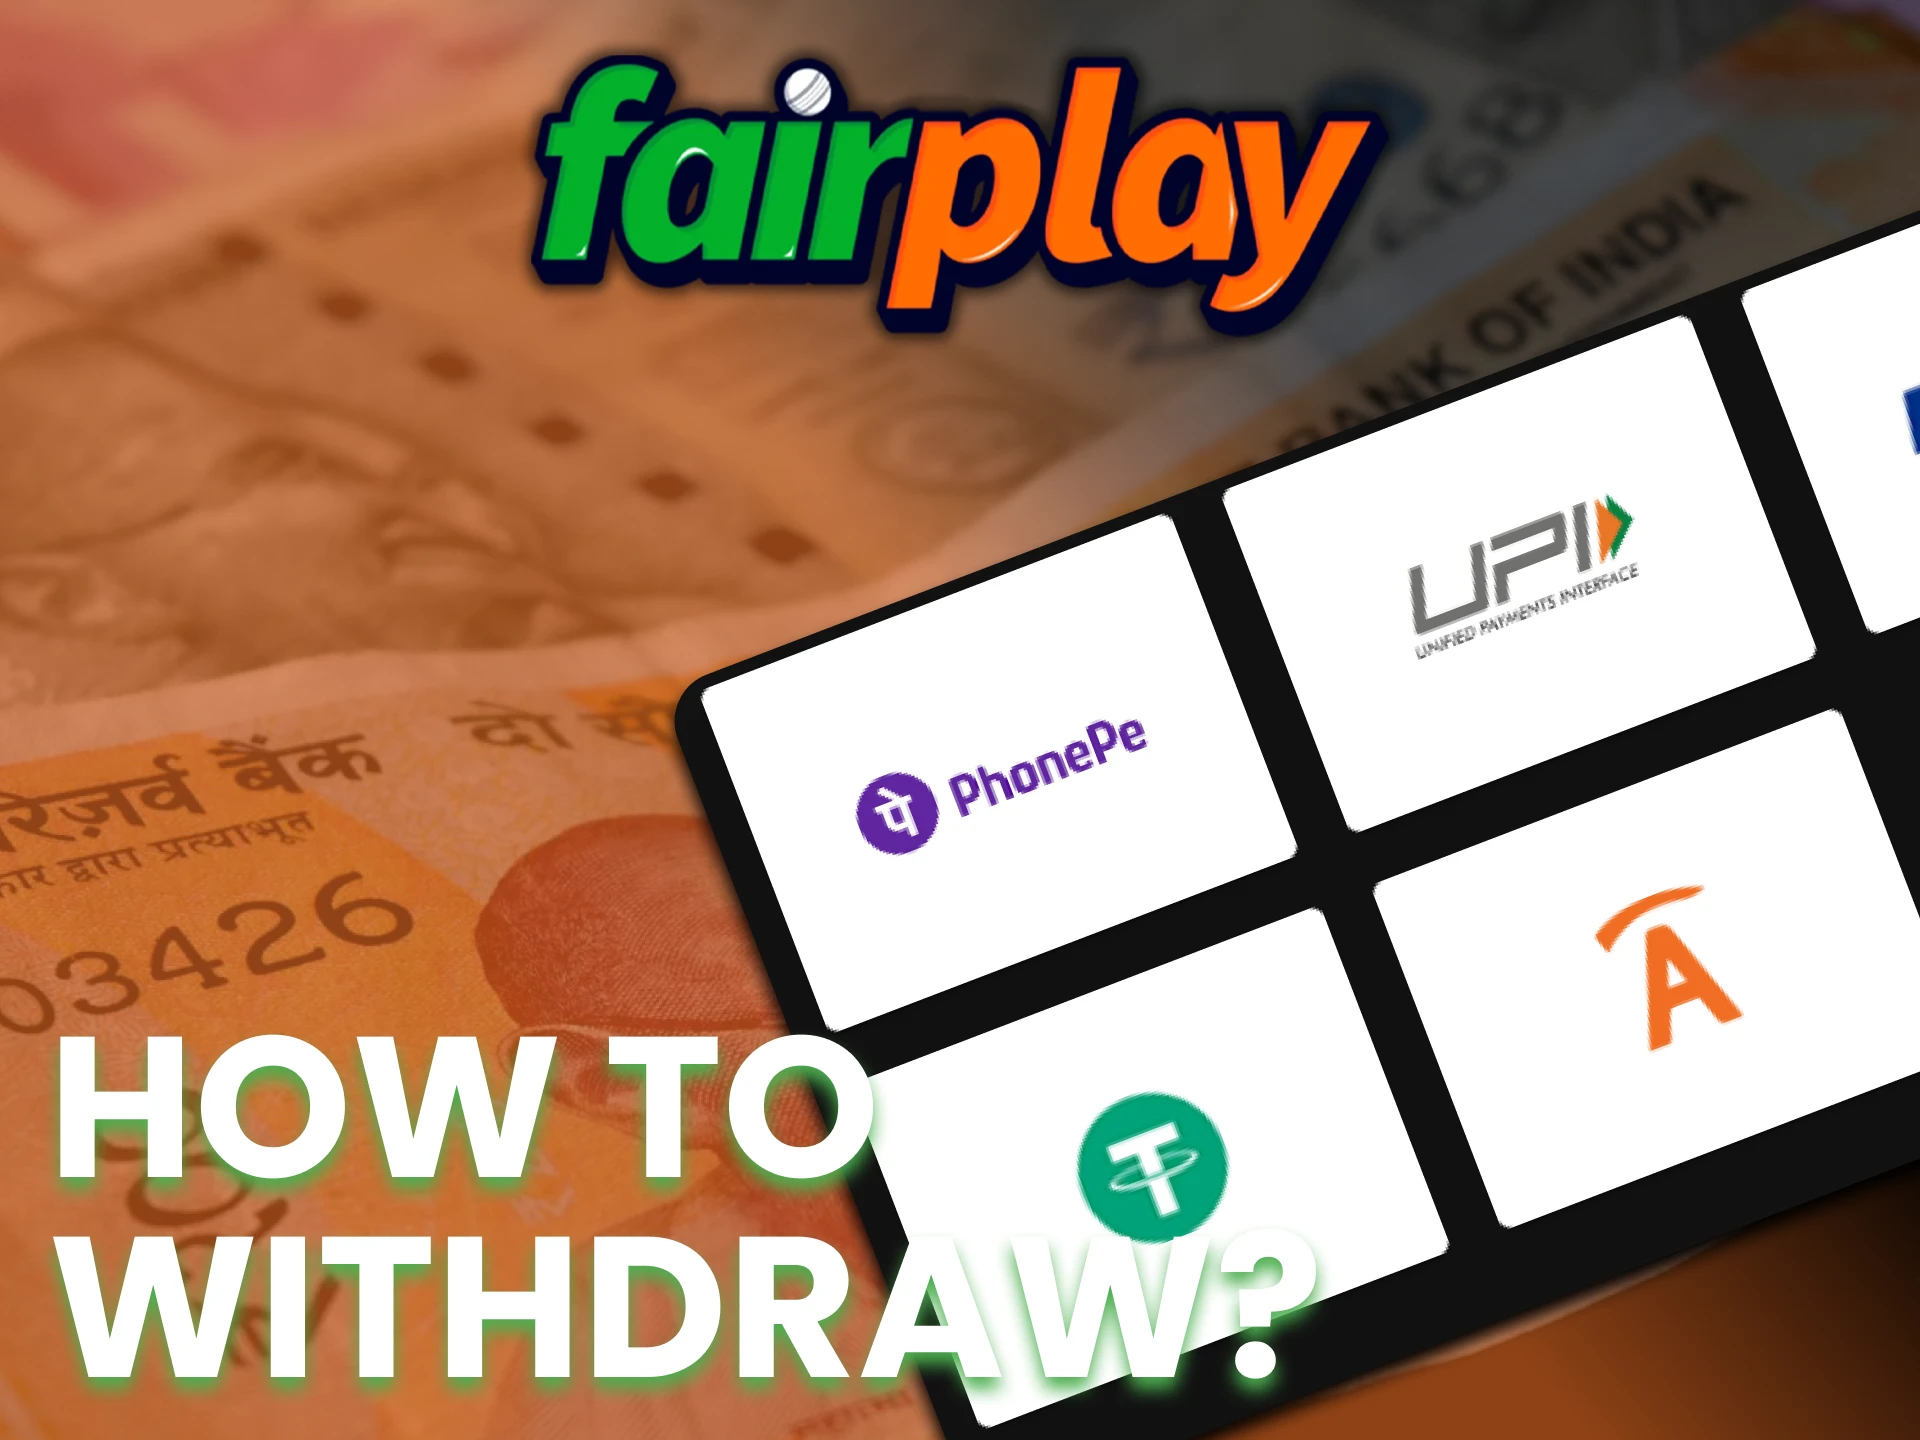 Withdraw your money without problems at the Fairplay.